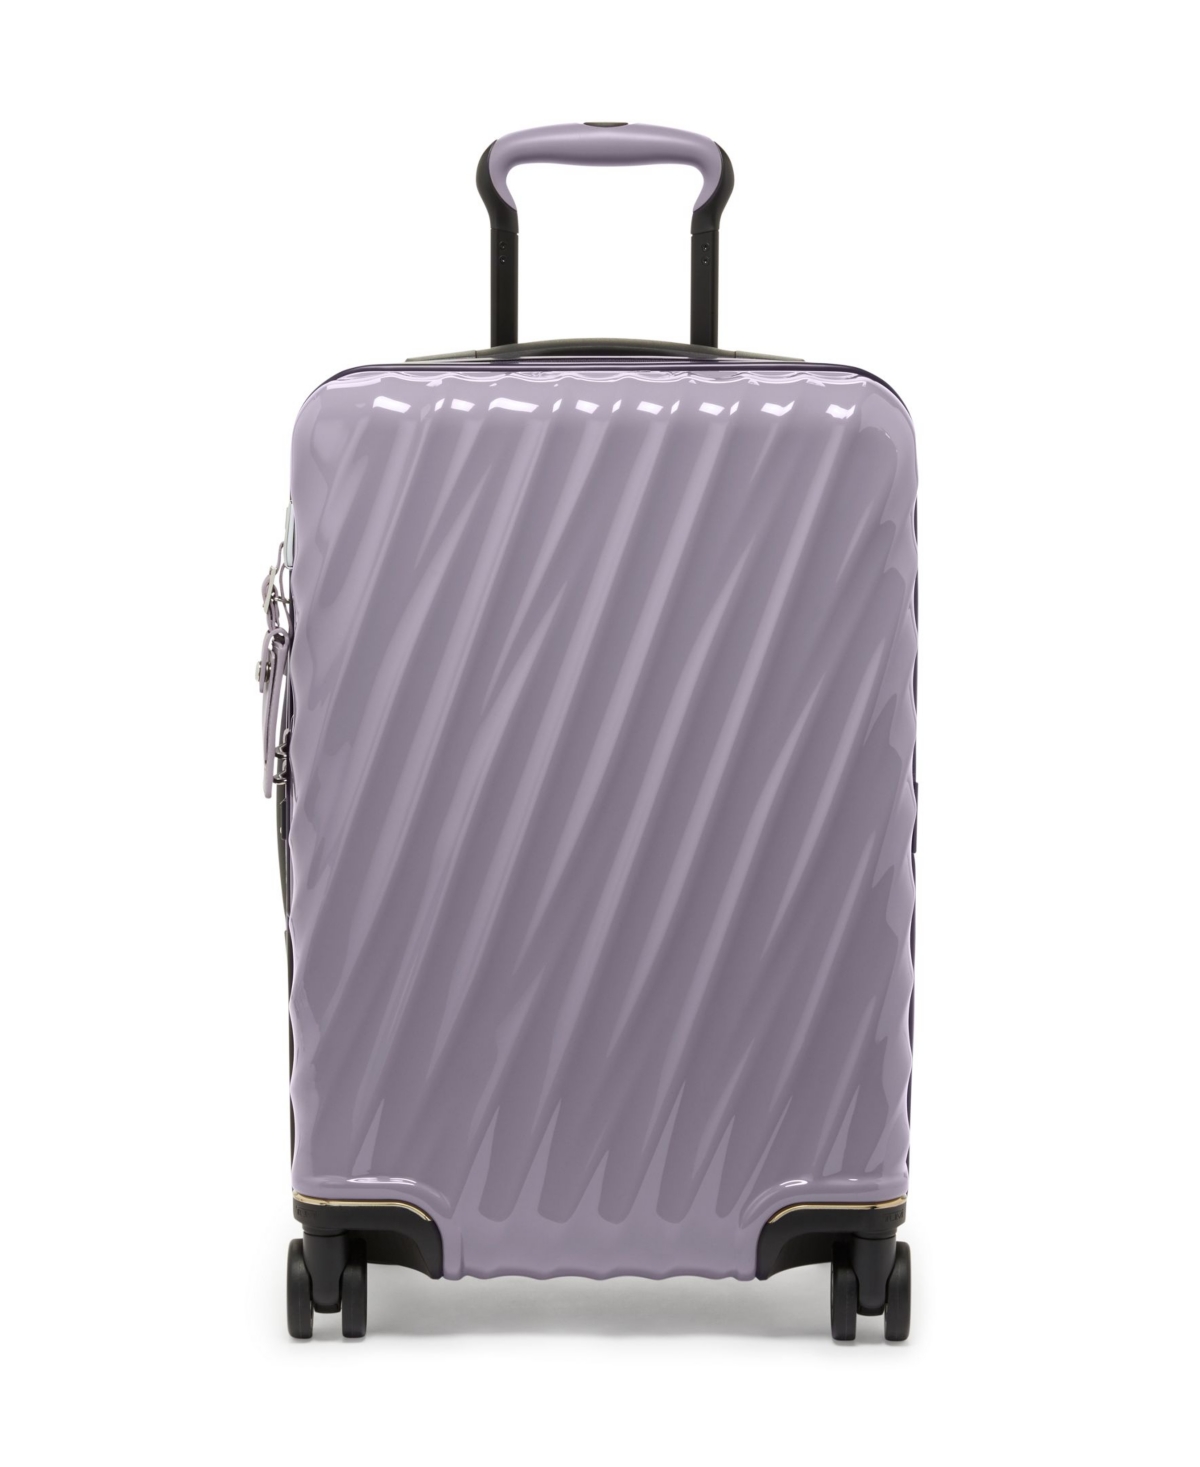 TUMI 19 DEGREE 21" CARRY-ON INTL EXP LUGGAGE